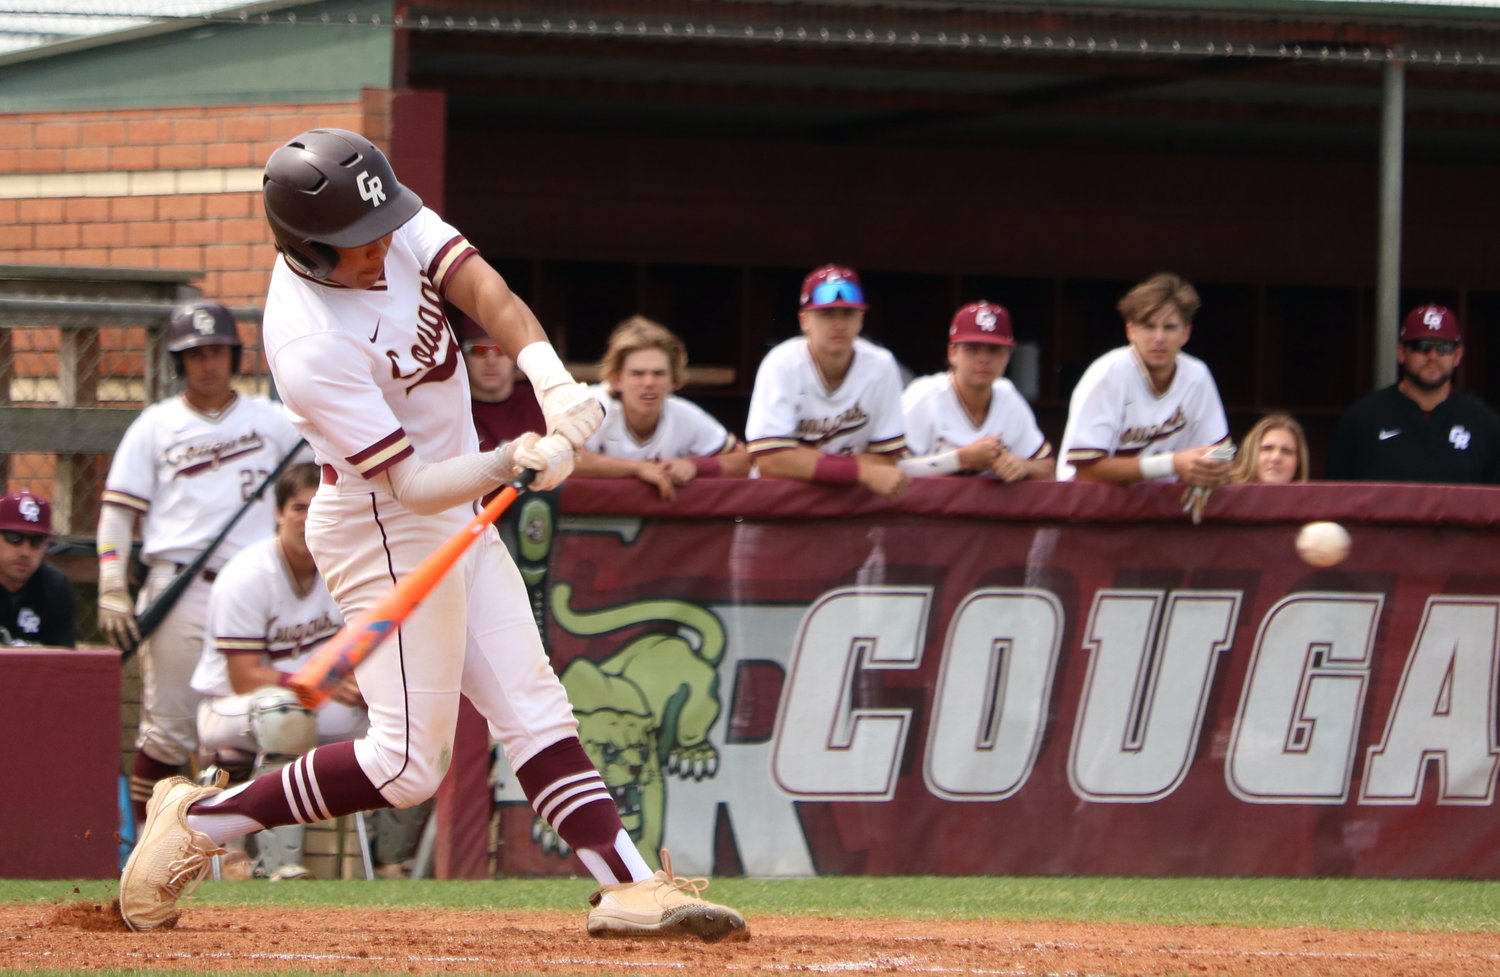 Torin Green hits during Tuesday's game between Tompkins and Cinco Ranch at the Cinco Ranch baseball field.